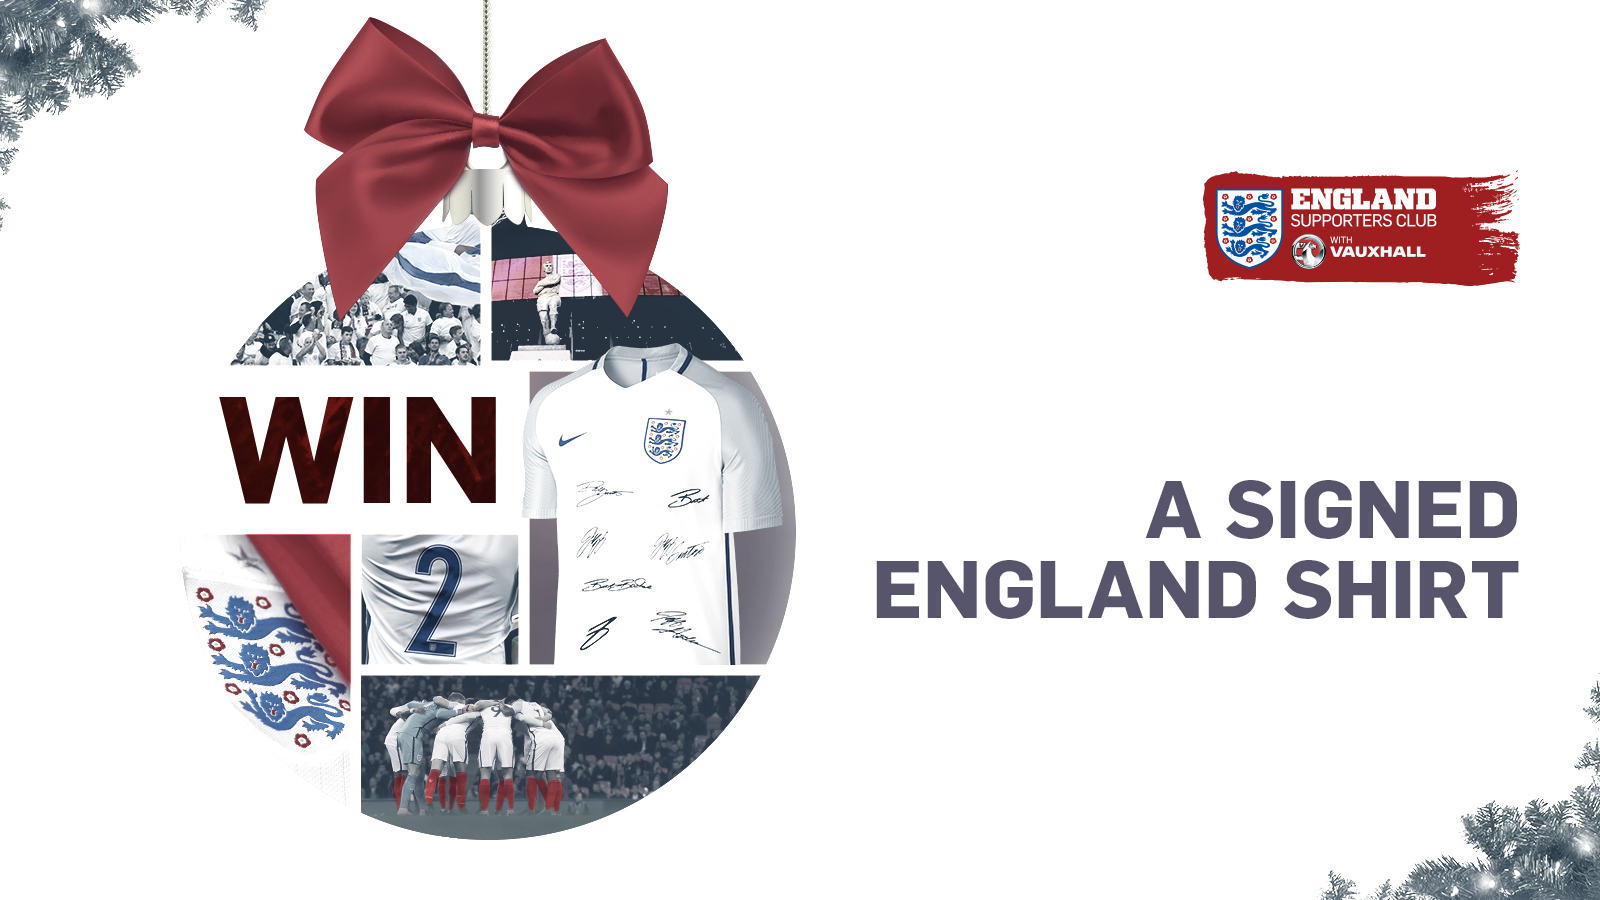 Day 2 of our Christmas advent calendar: win a signed shirt